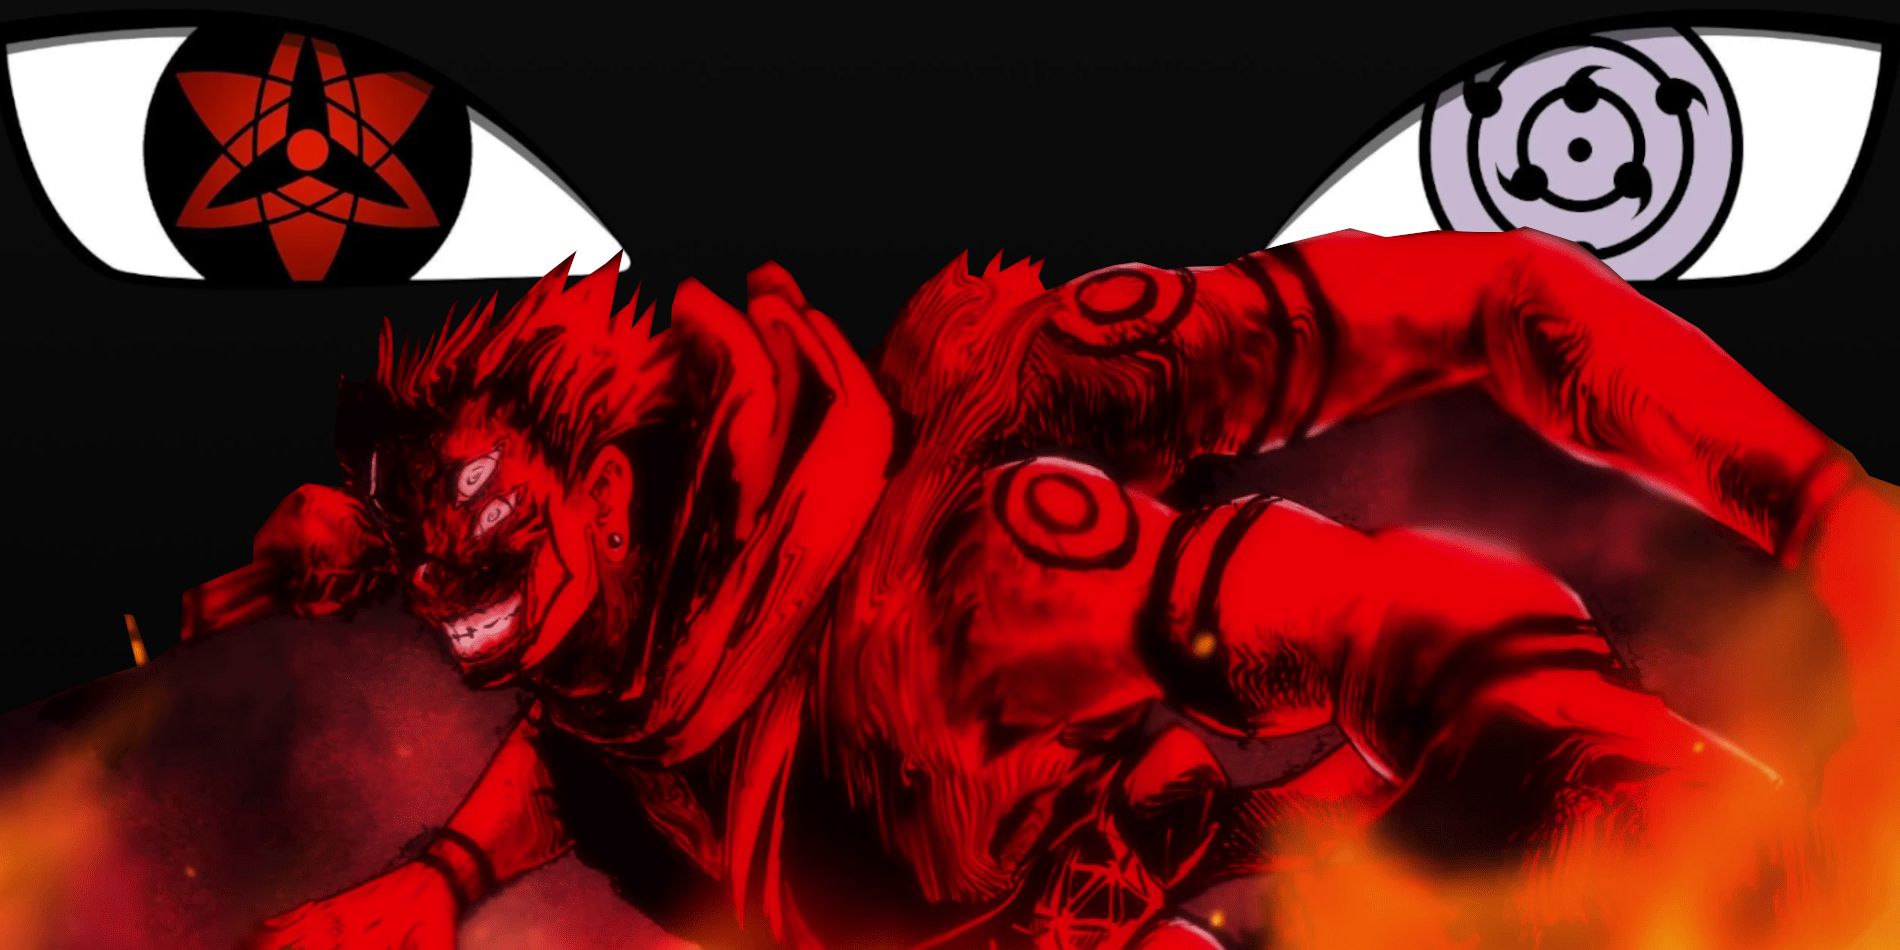 Image shows a red siloutte of Jujutsu Kaisen's Sukuna is possibly his final form with Sasuke's Sharingan and Rinnegan eyes from the Naruto series in the background.